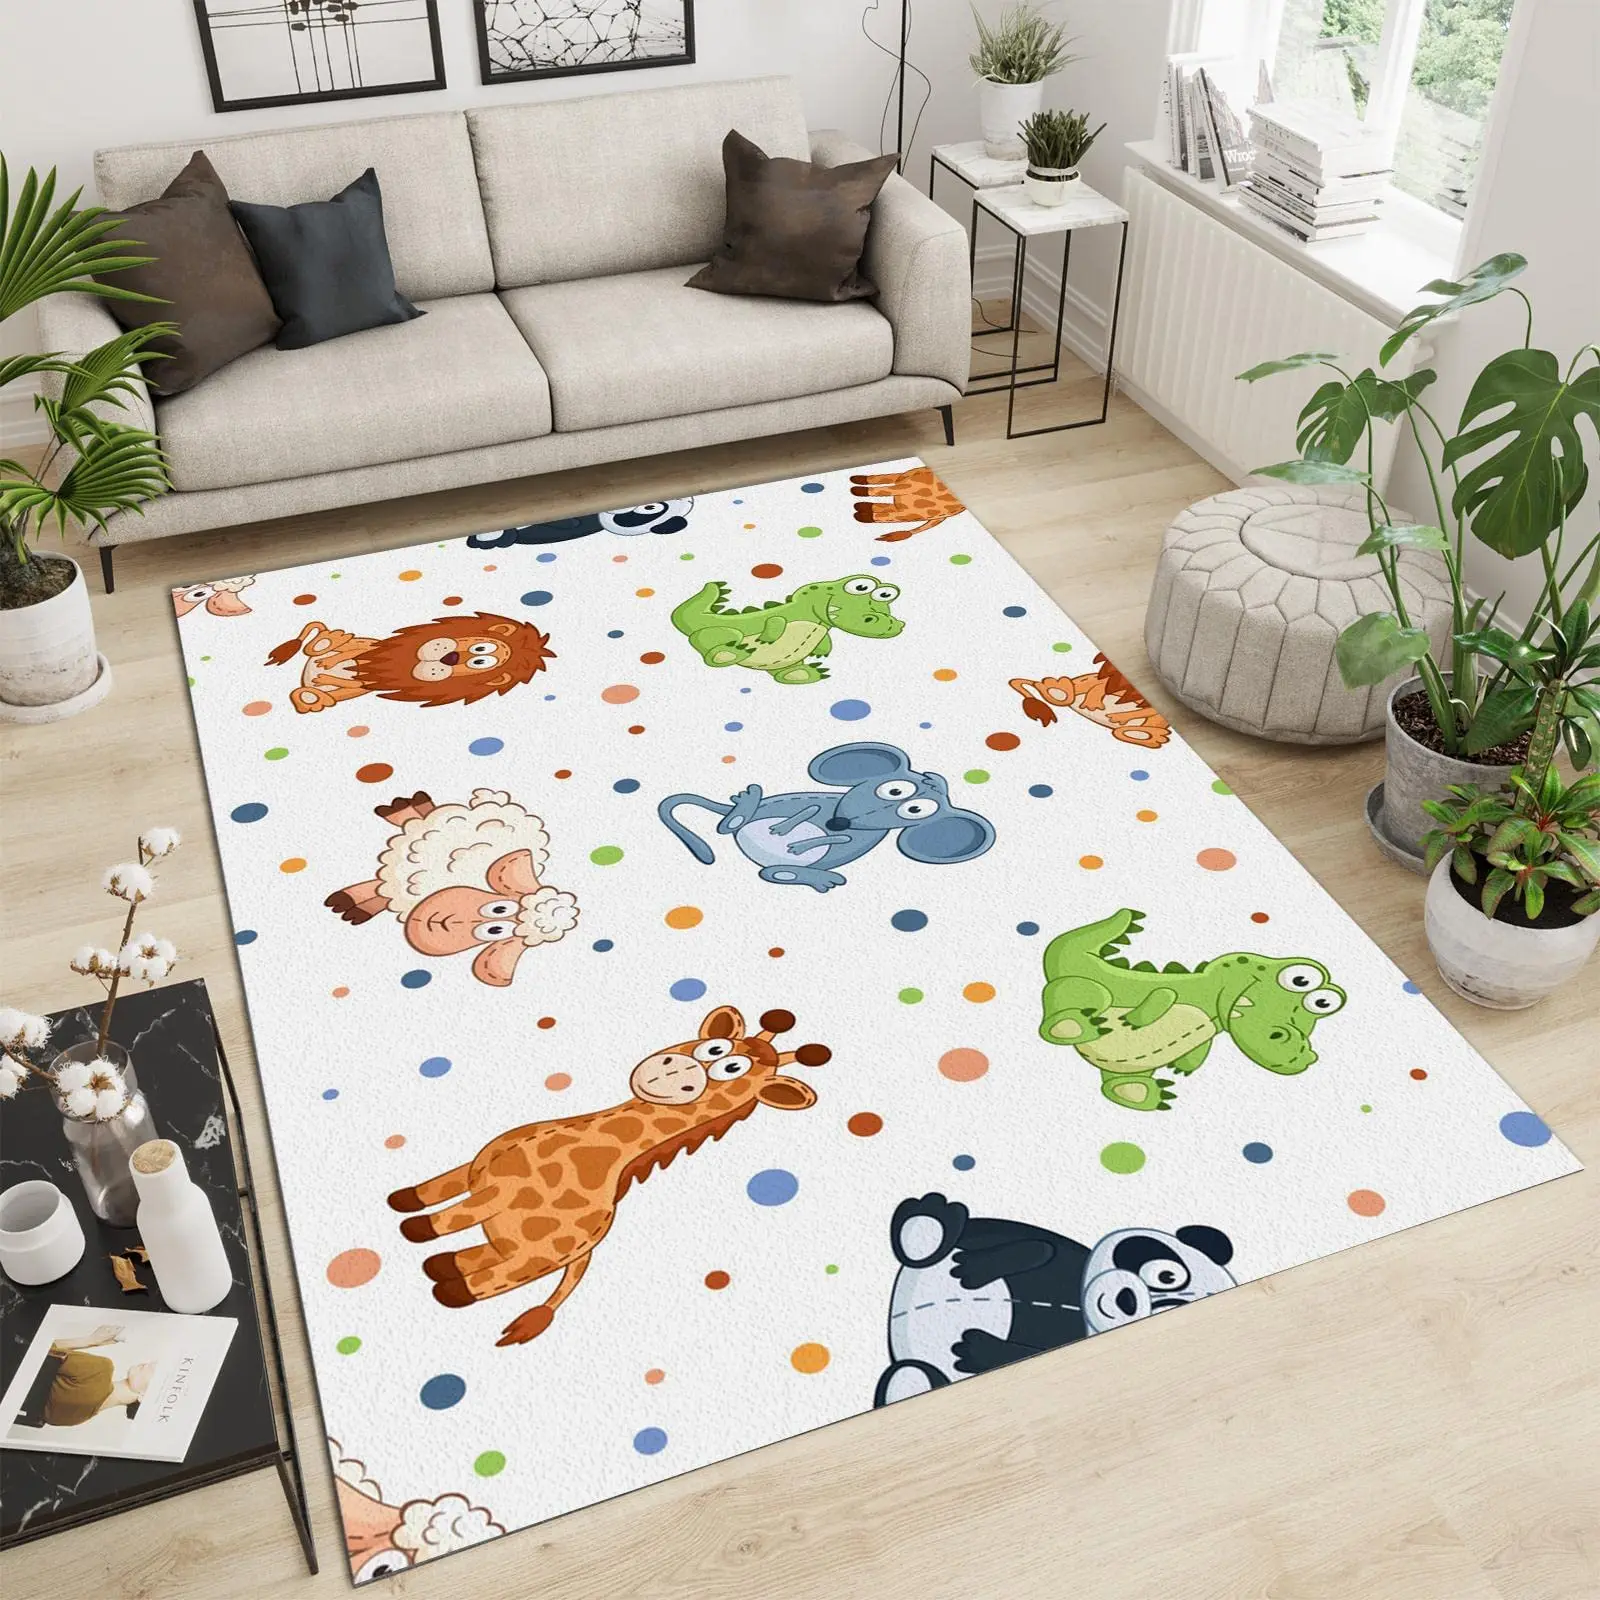 

HX Infant Crawling Pad Cute Crocodile Lion Giraffe 3D Printed Areas Rugs Flannel Material Mats for Living Room Dropshipping